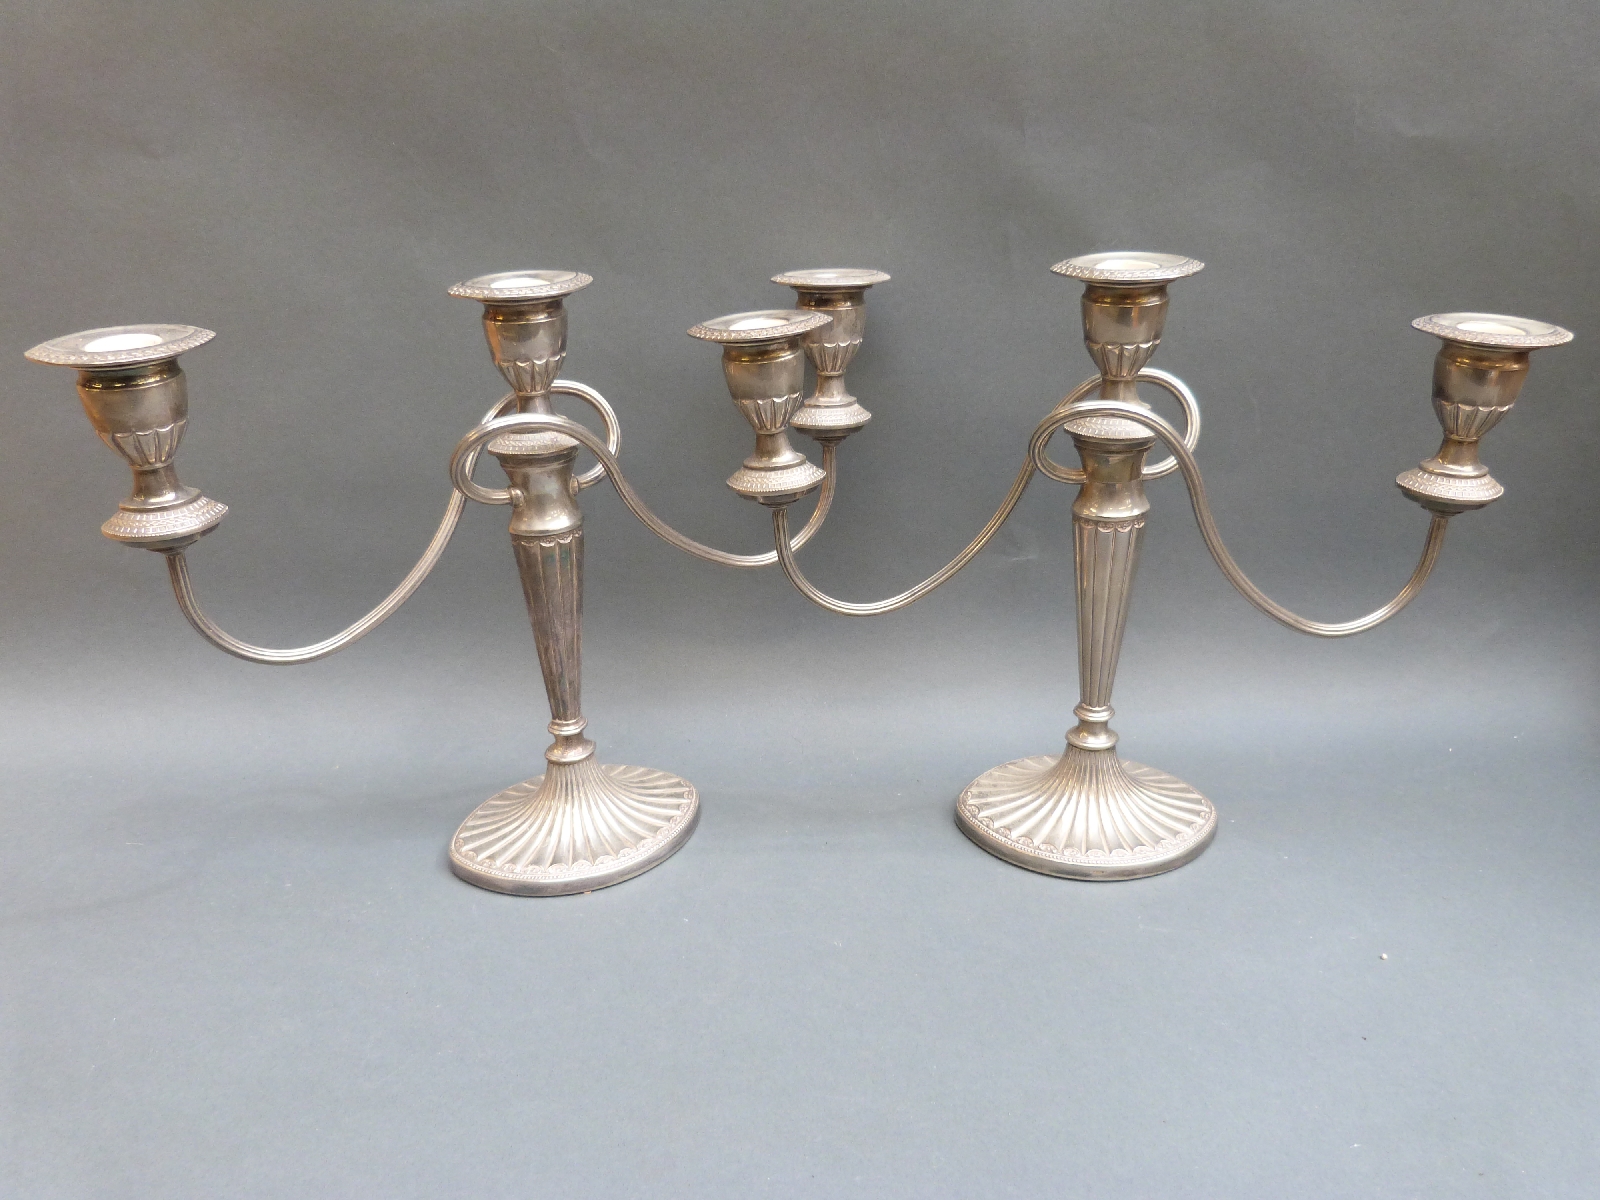 A collection of plated ware including candleabras, one with four branches; tray, fish servers, - Image 3 of 4